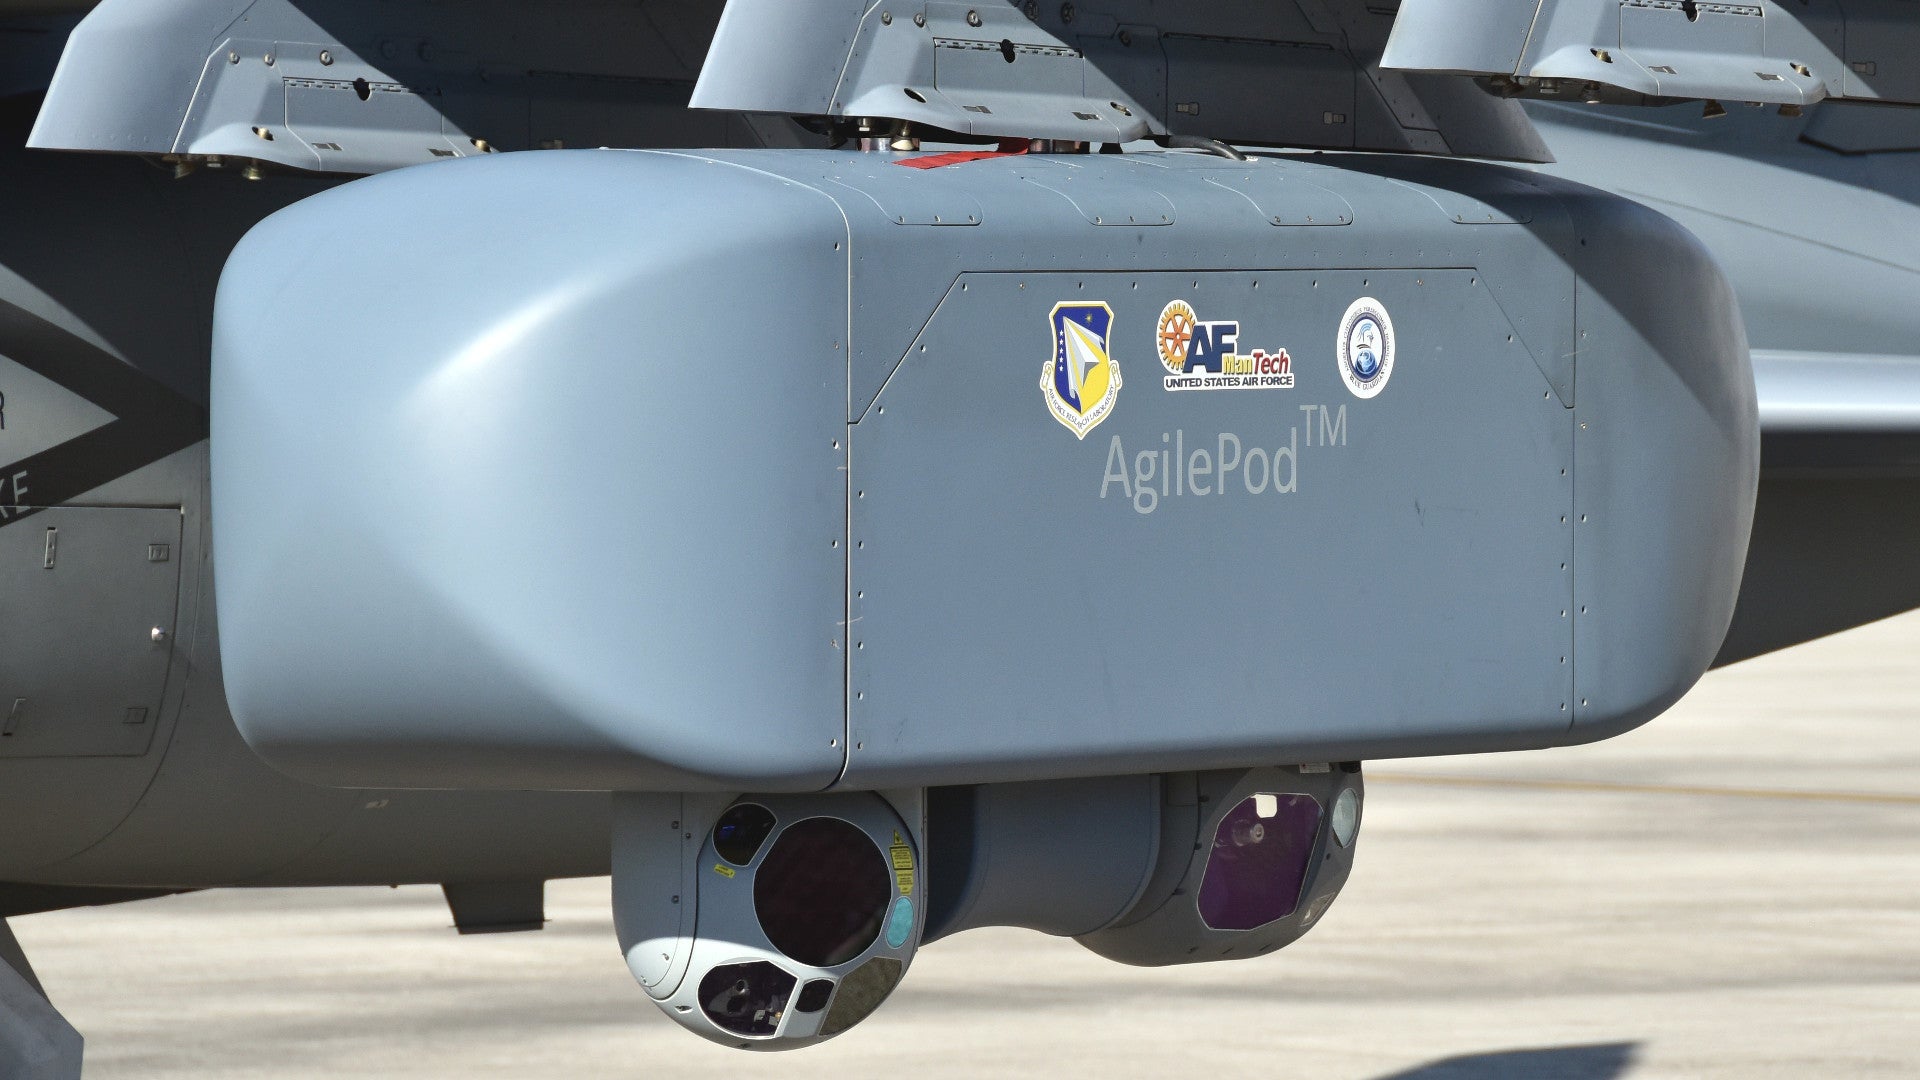 USAF Plans To Drastically Boost Flexibility of U-2s and RQ-4s By Adding Modular ‘Agile Pods’